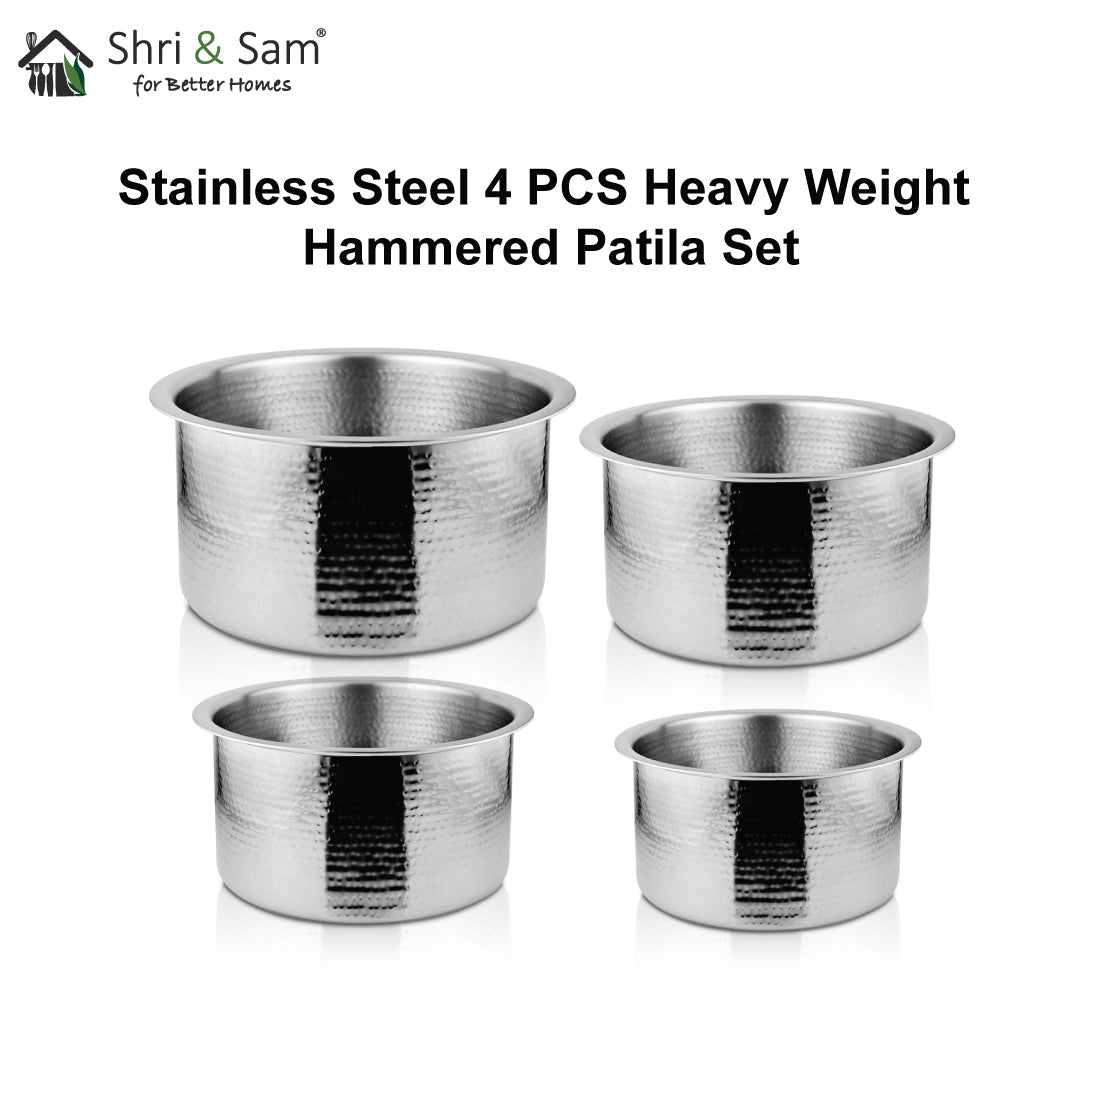 Stainless Steel 4 PCS Heavy Weight Hammered Patila Set